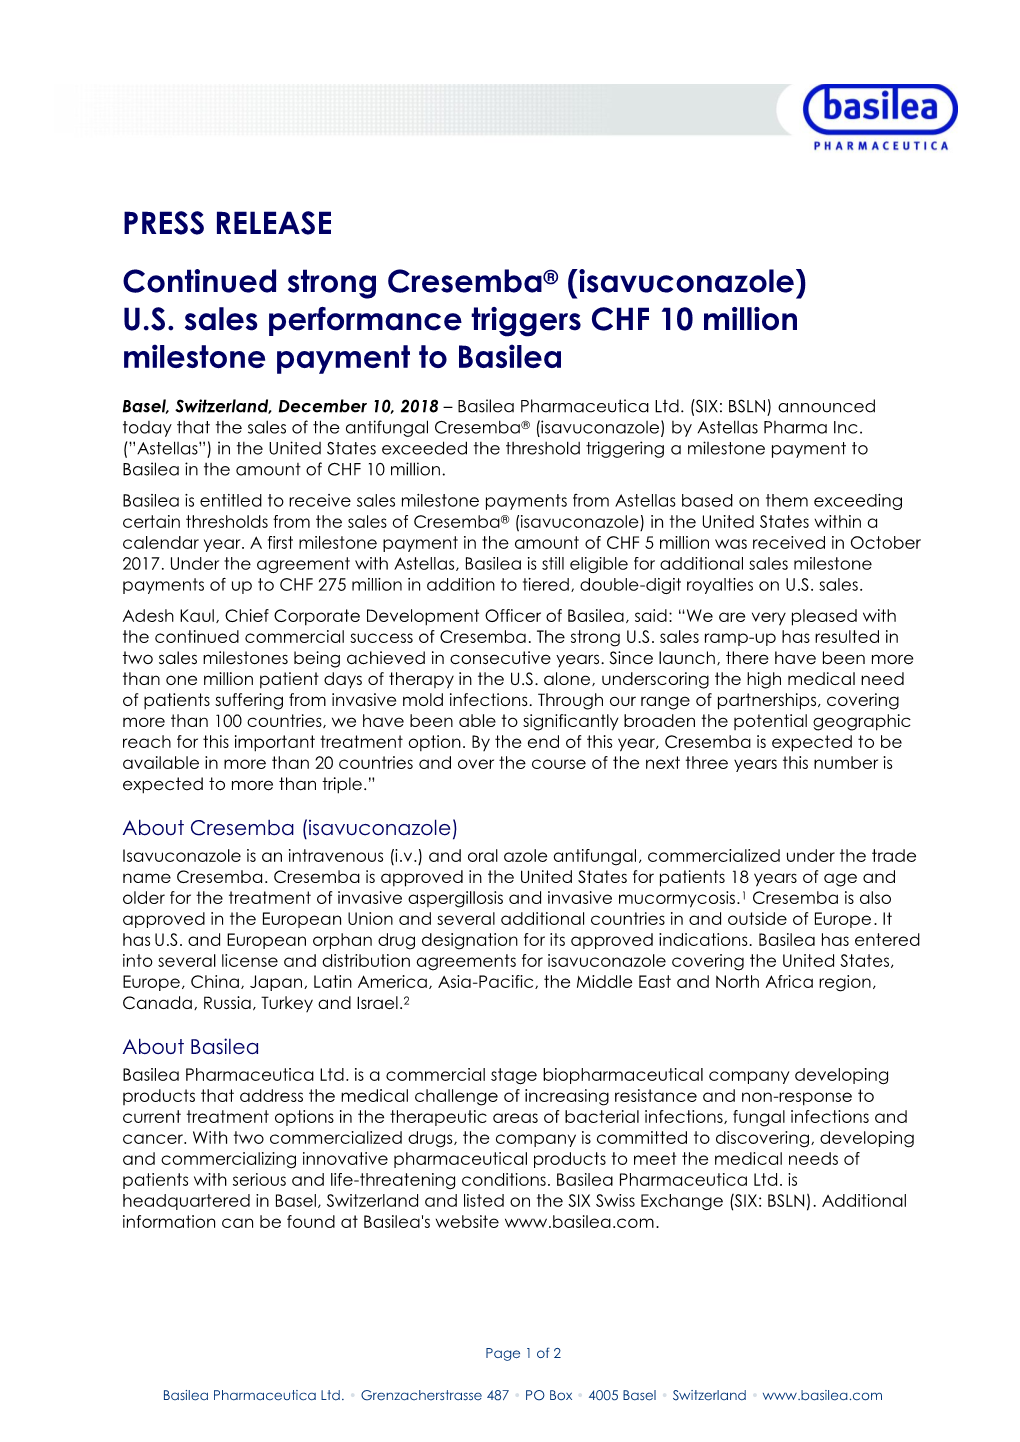 PRESS RELEASE Continued Strong Cresemba® (Isavuconazole) U.S